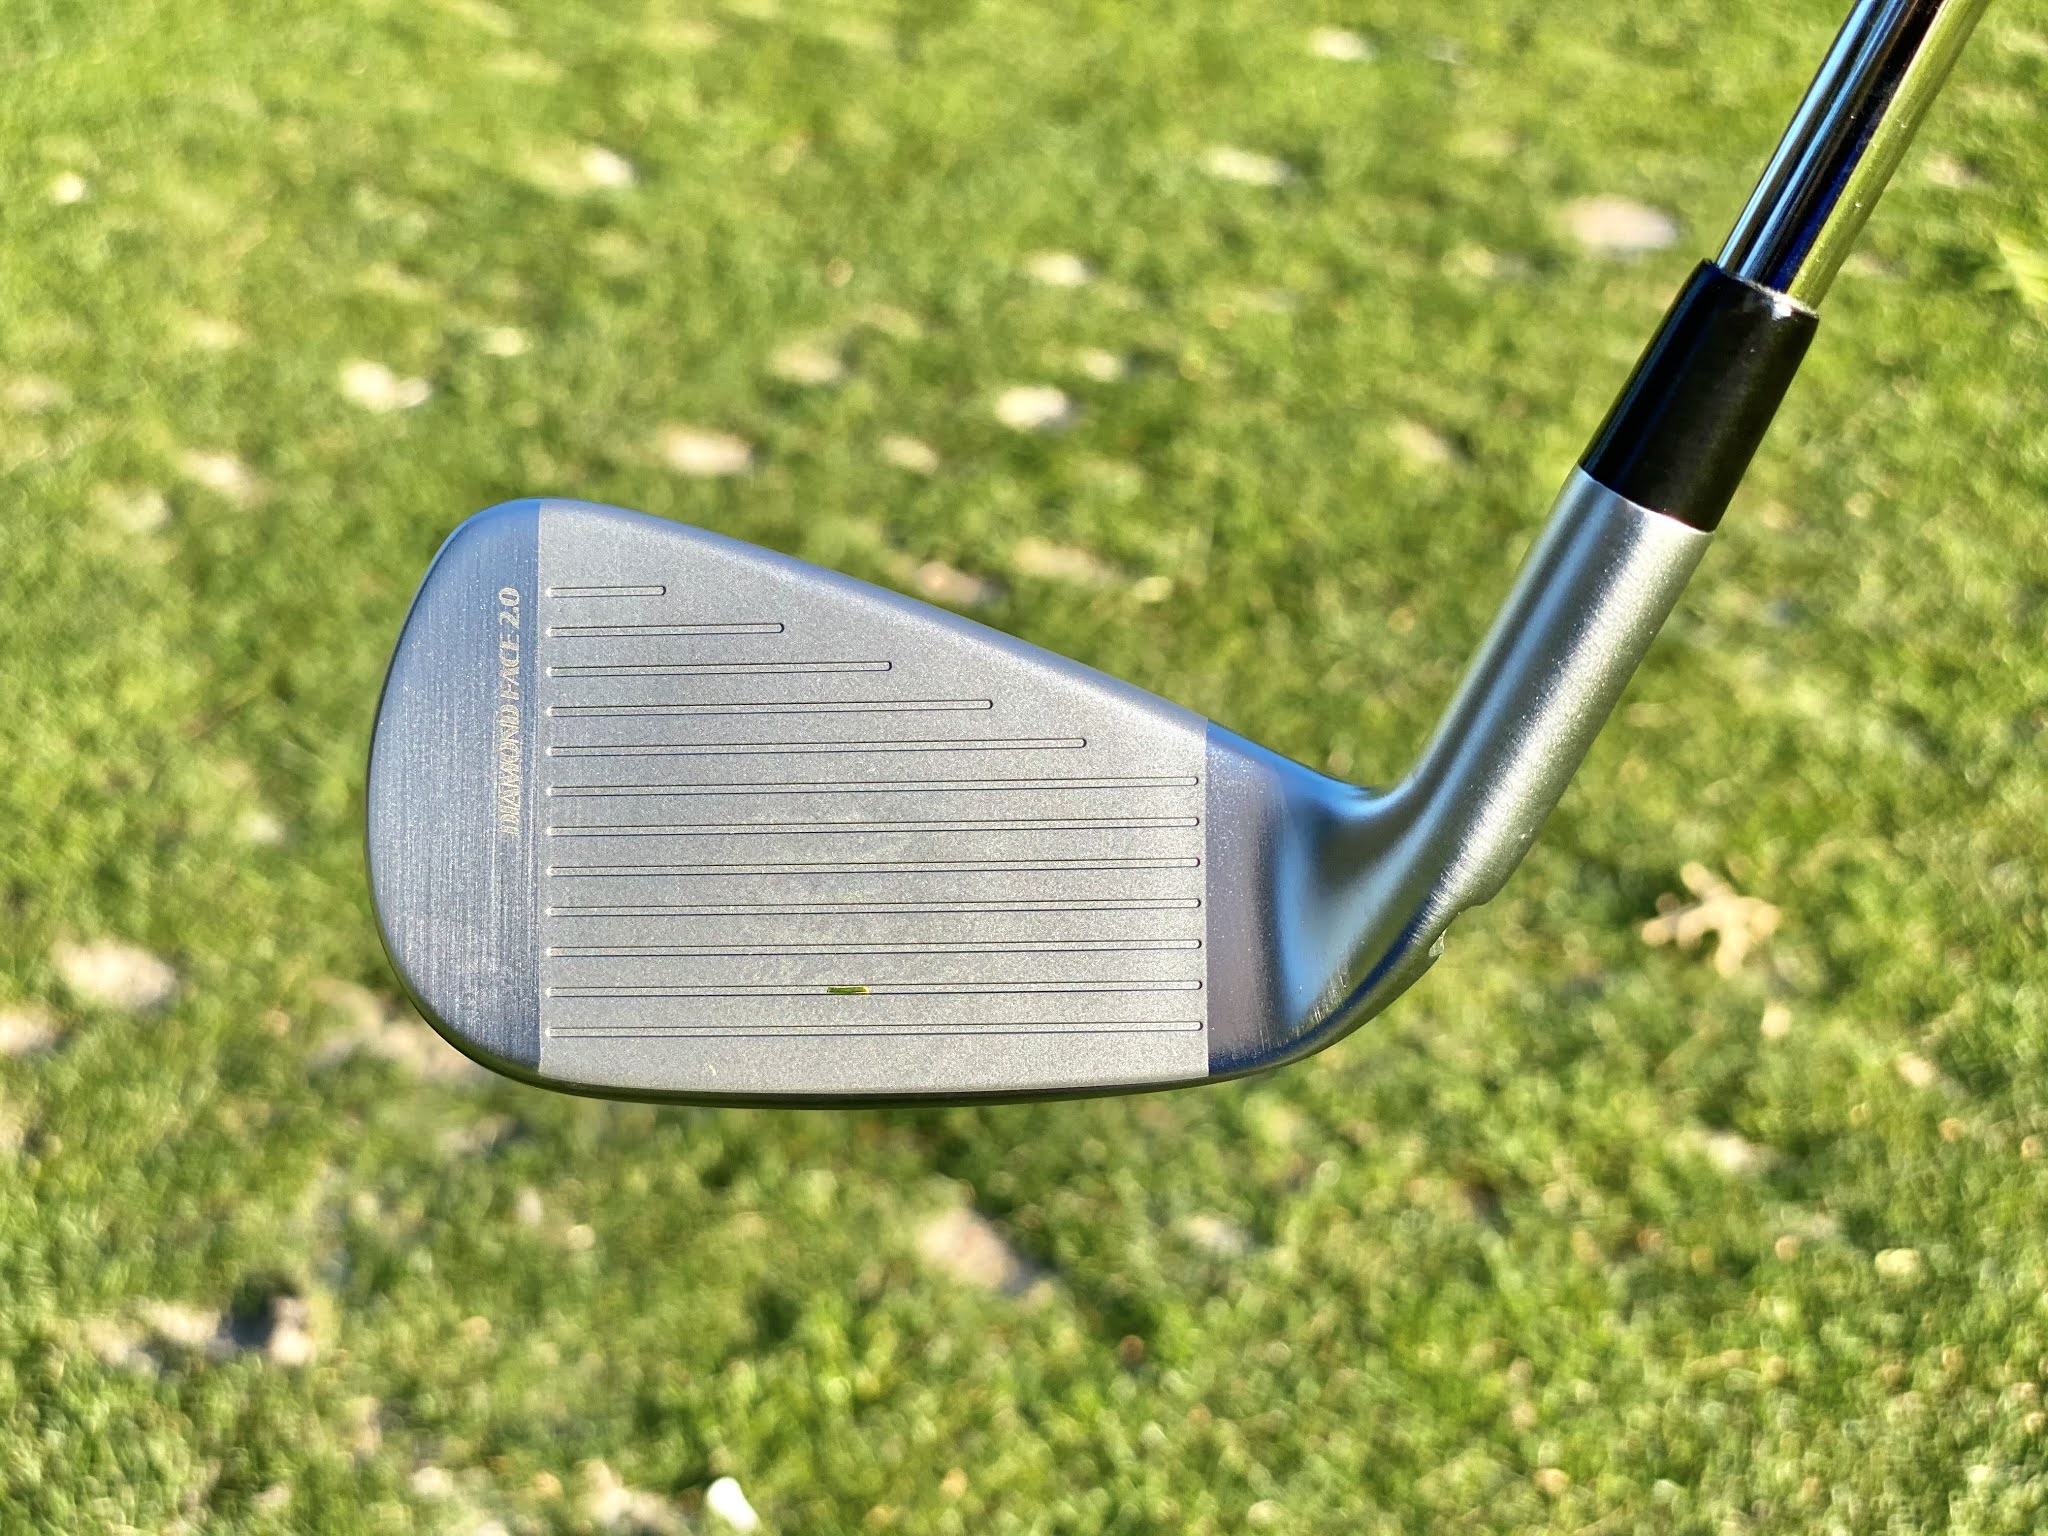 tour edge c721 irons for sale